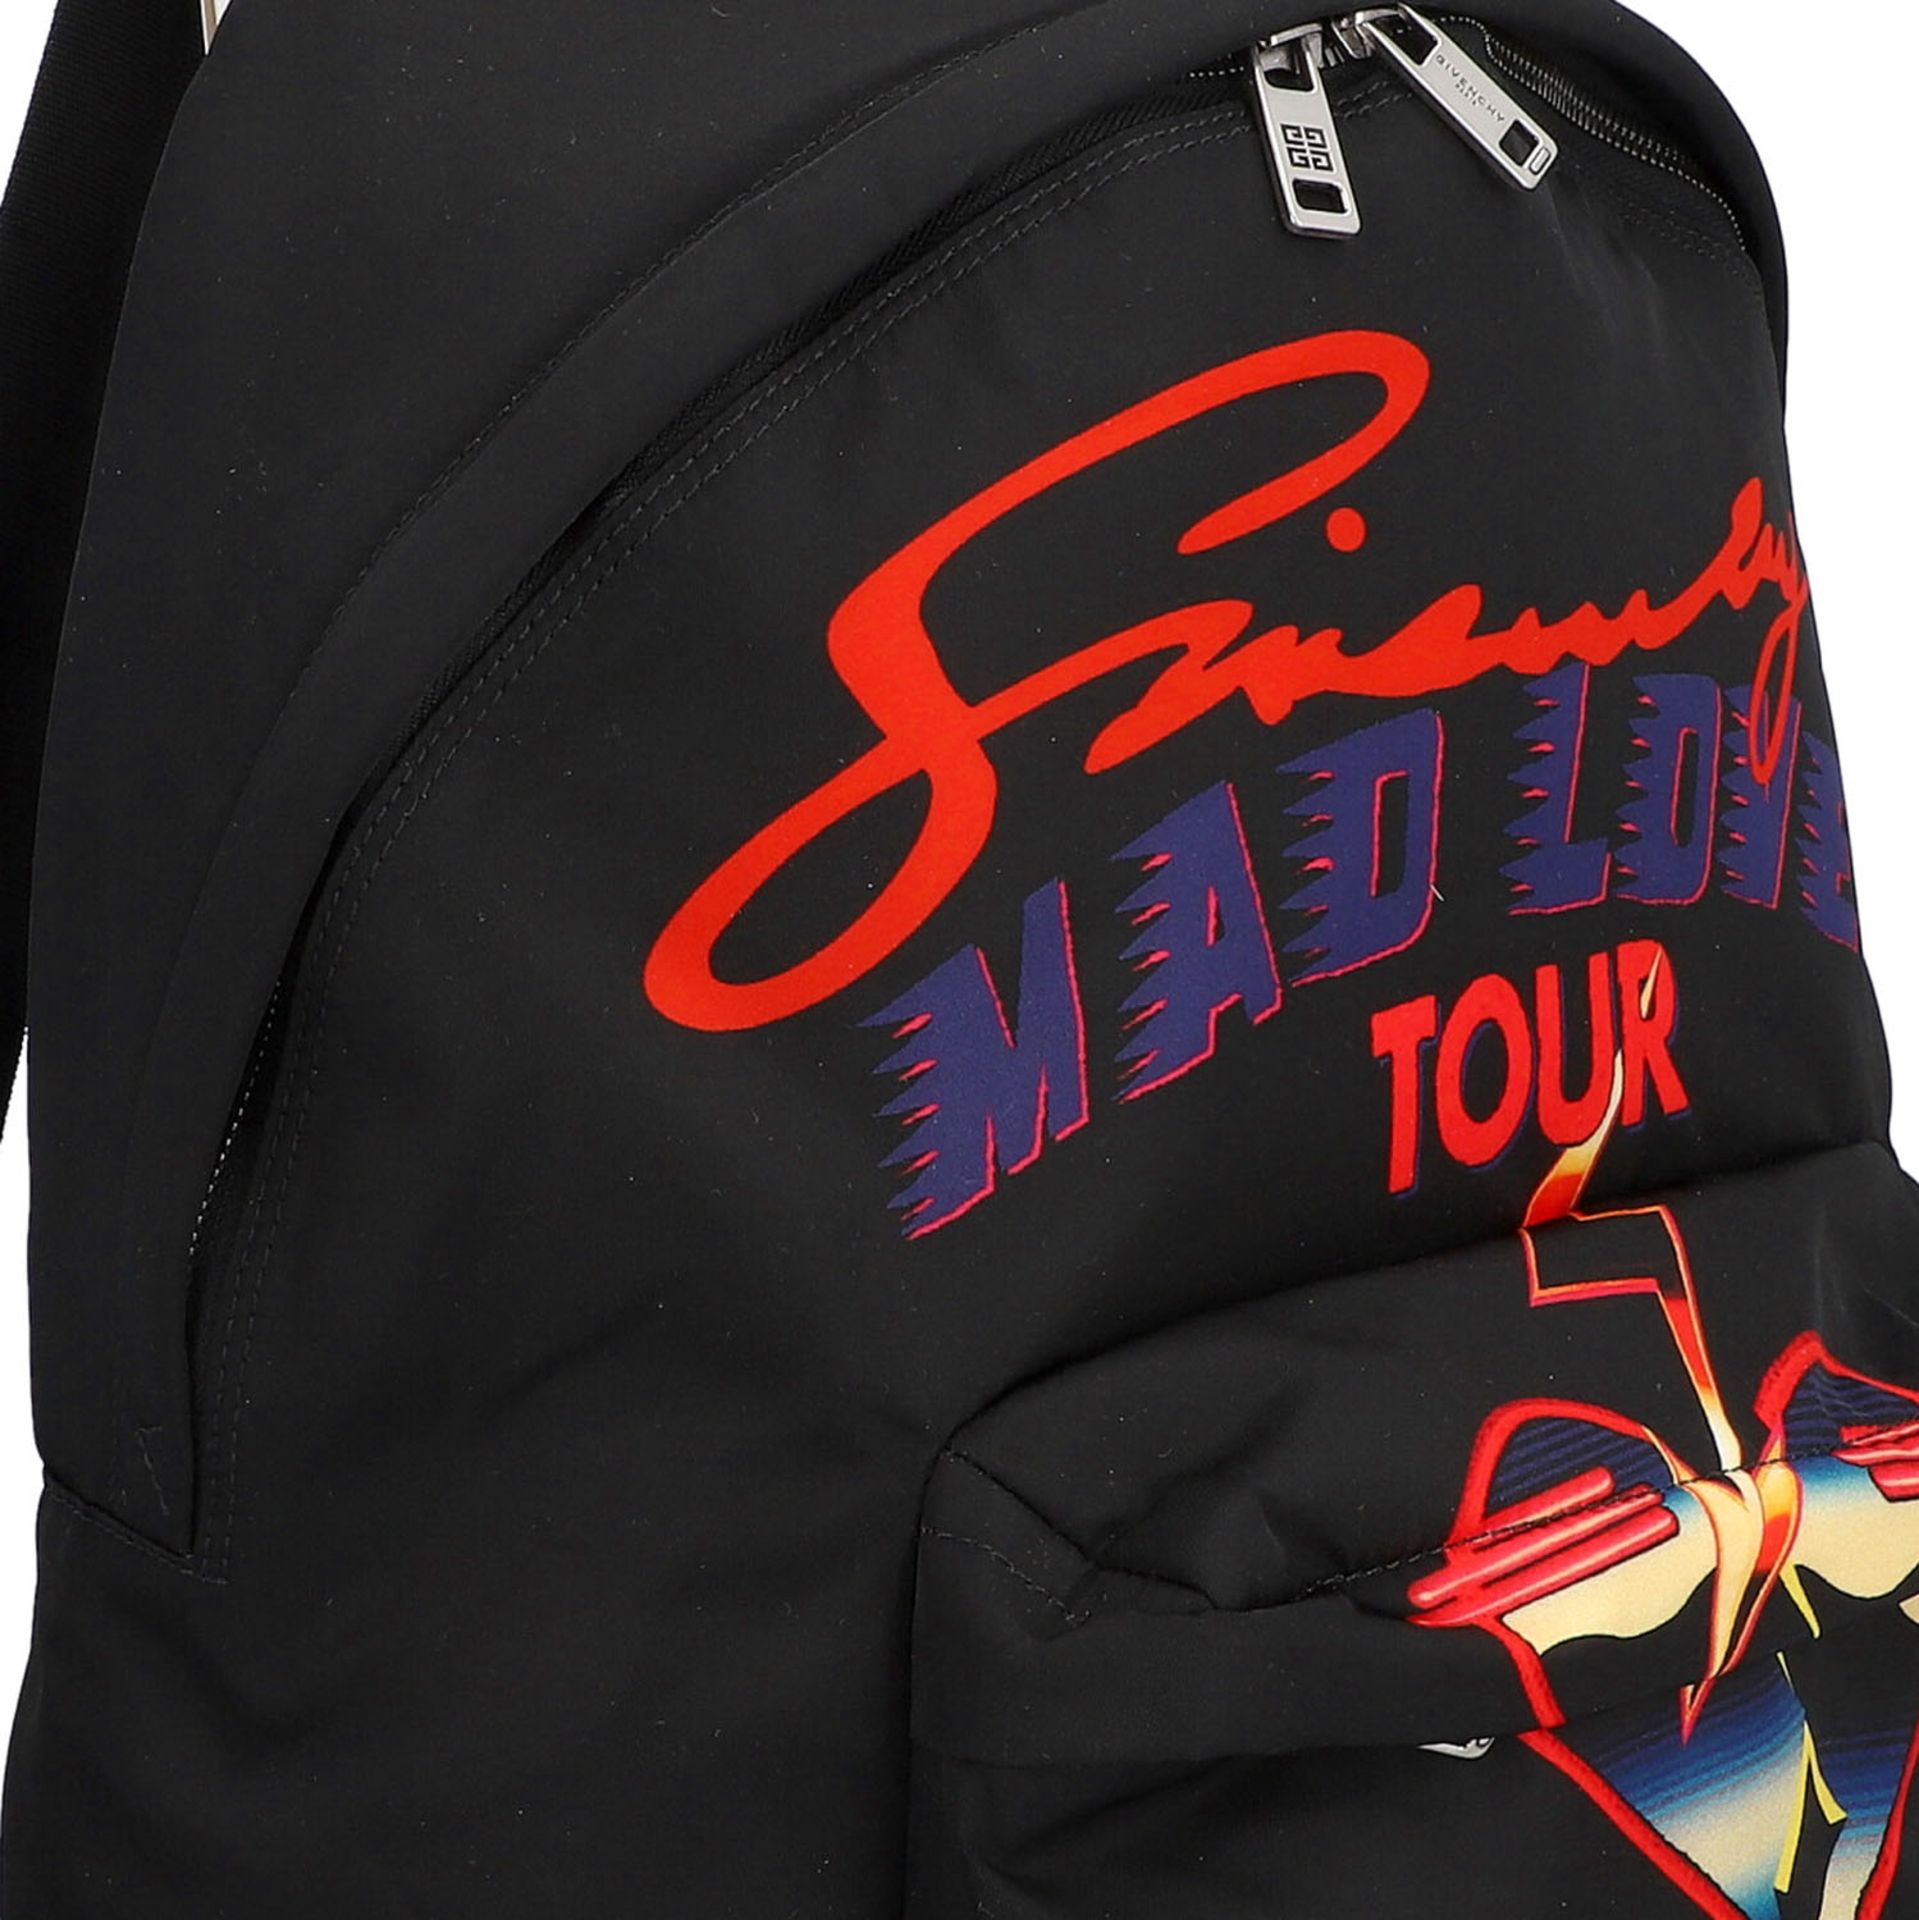 GIVENCHY Rucksack "MAD LOVE TOUR". - Image 7 of 8